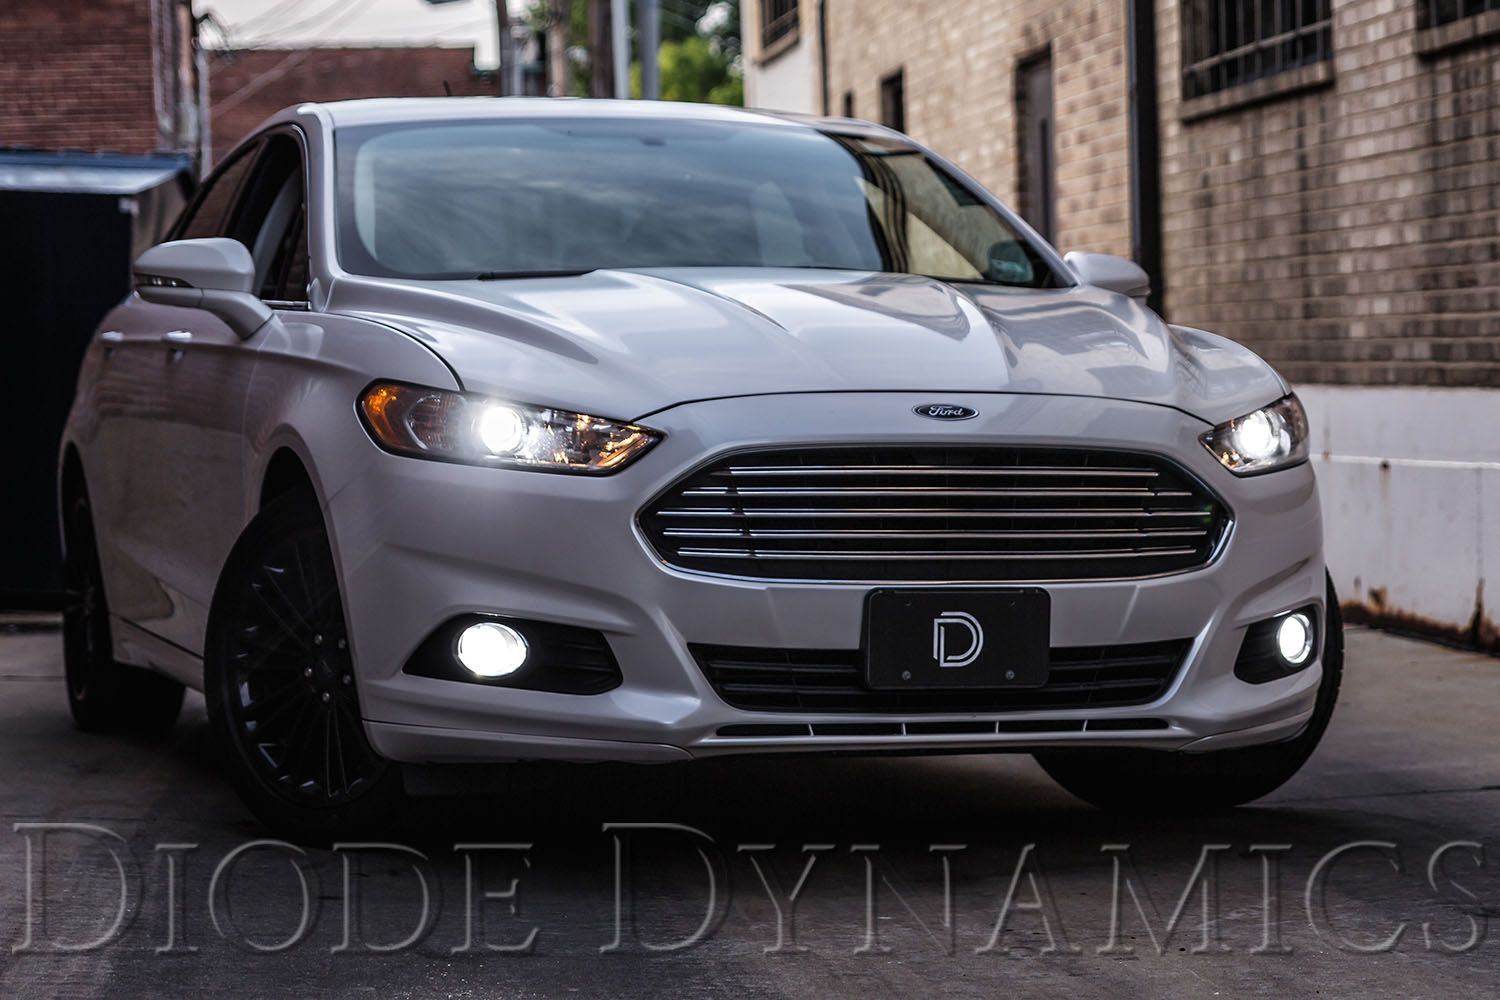 Top LED Lighting Upgrades for the 2013-2020 Ford Fusion